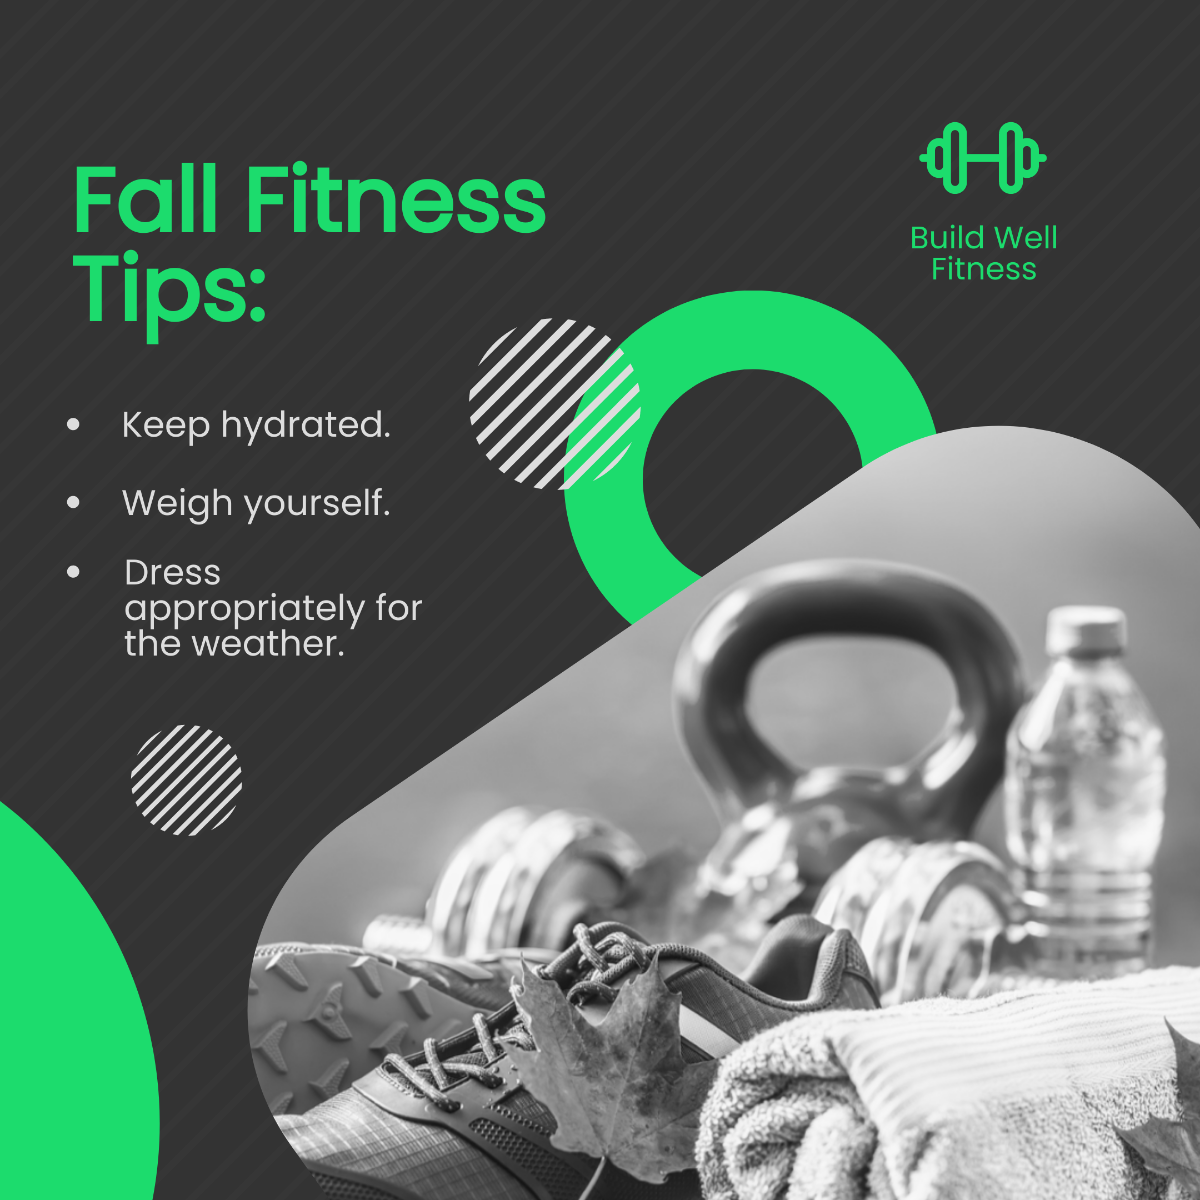 Free Fall Fitness Tips Post, Instagram, Facebook Template